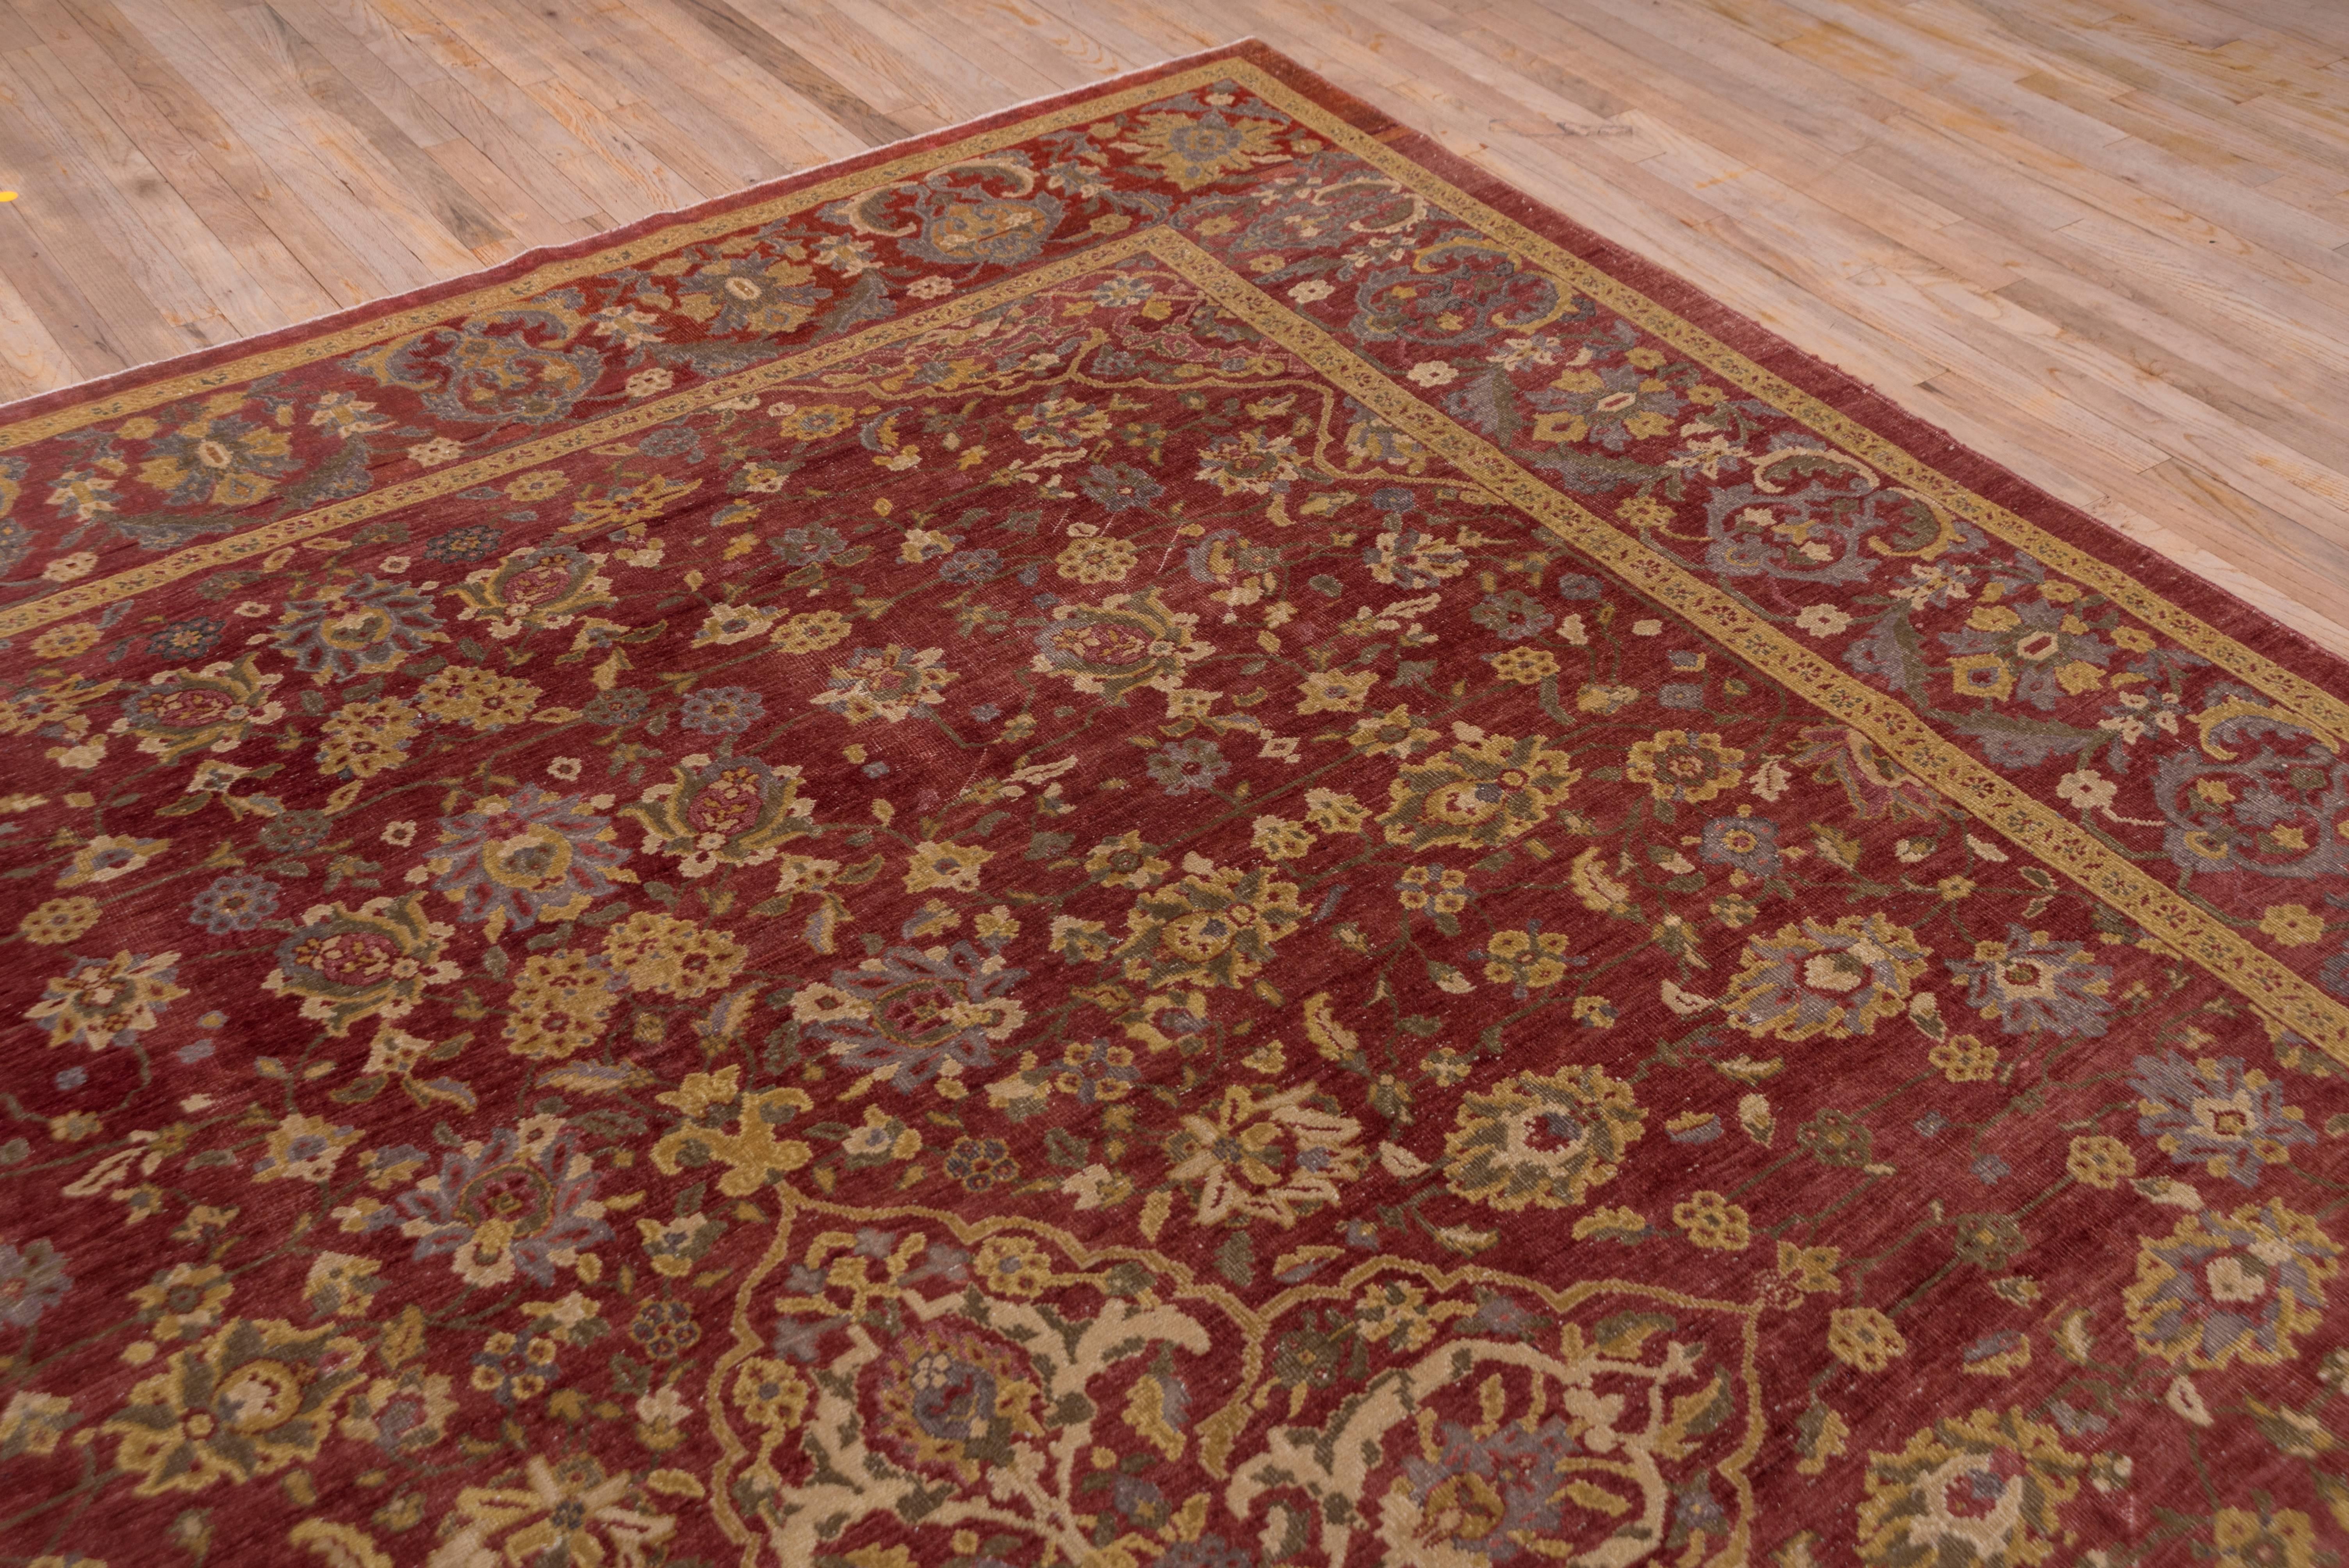 Hand-Knotted Antique Mahal Carpet, Circa 1920s, Red Field